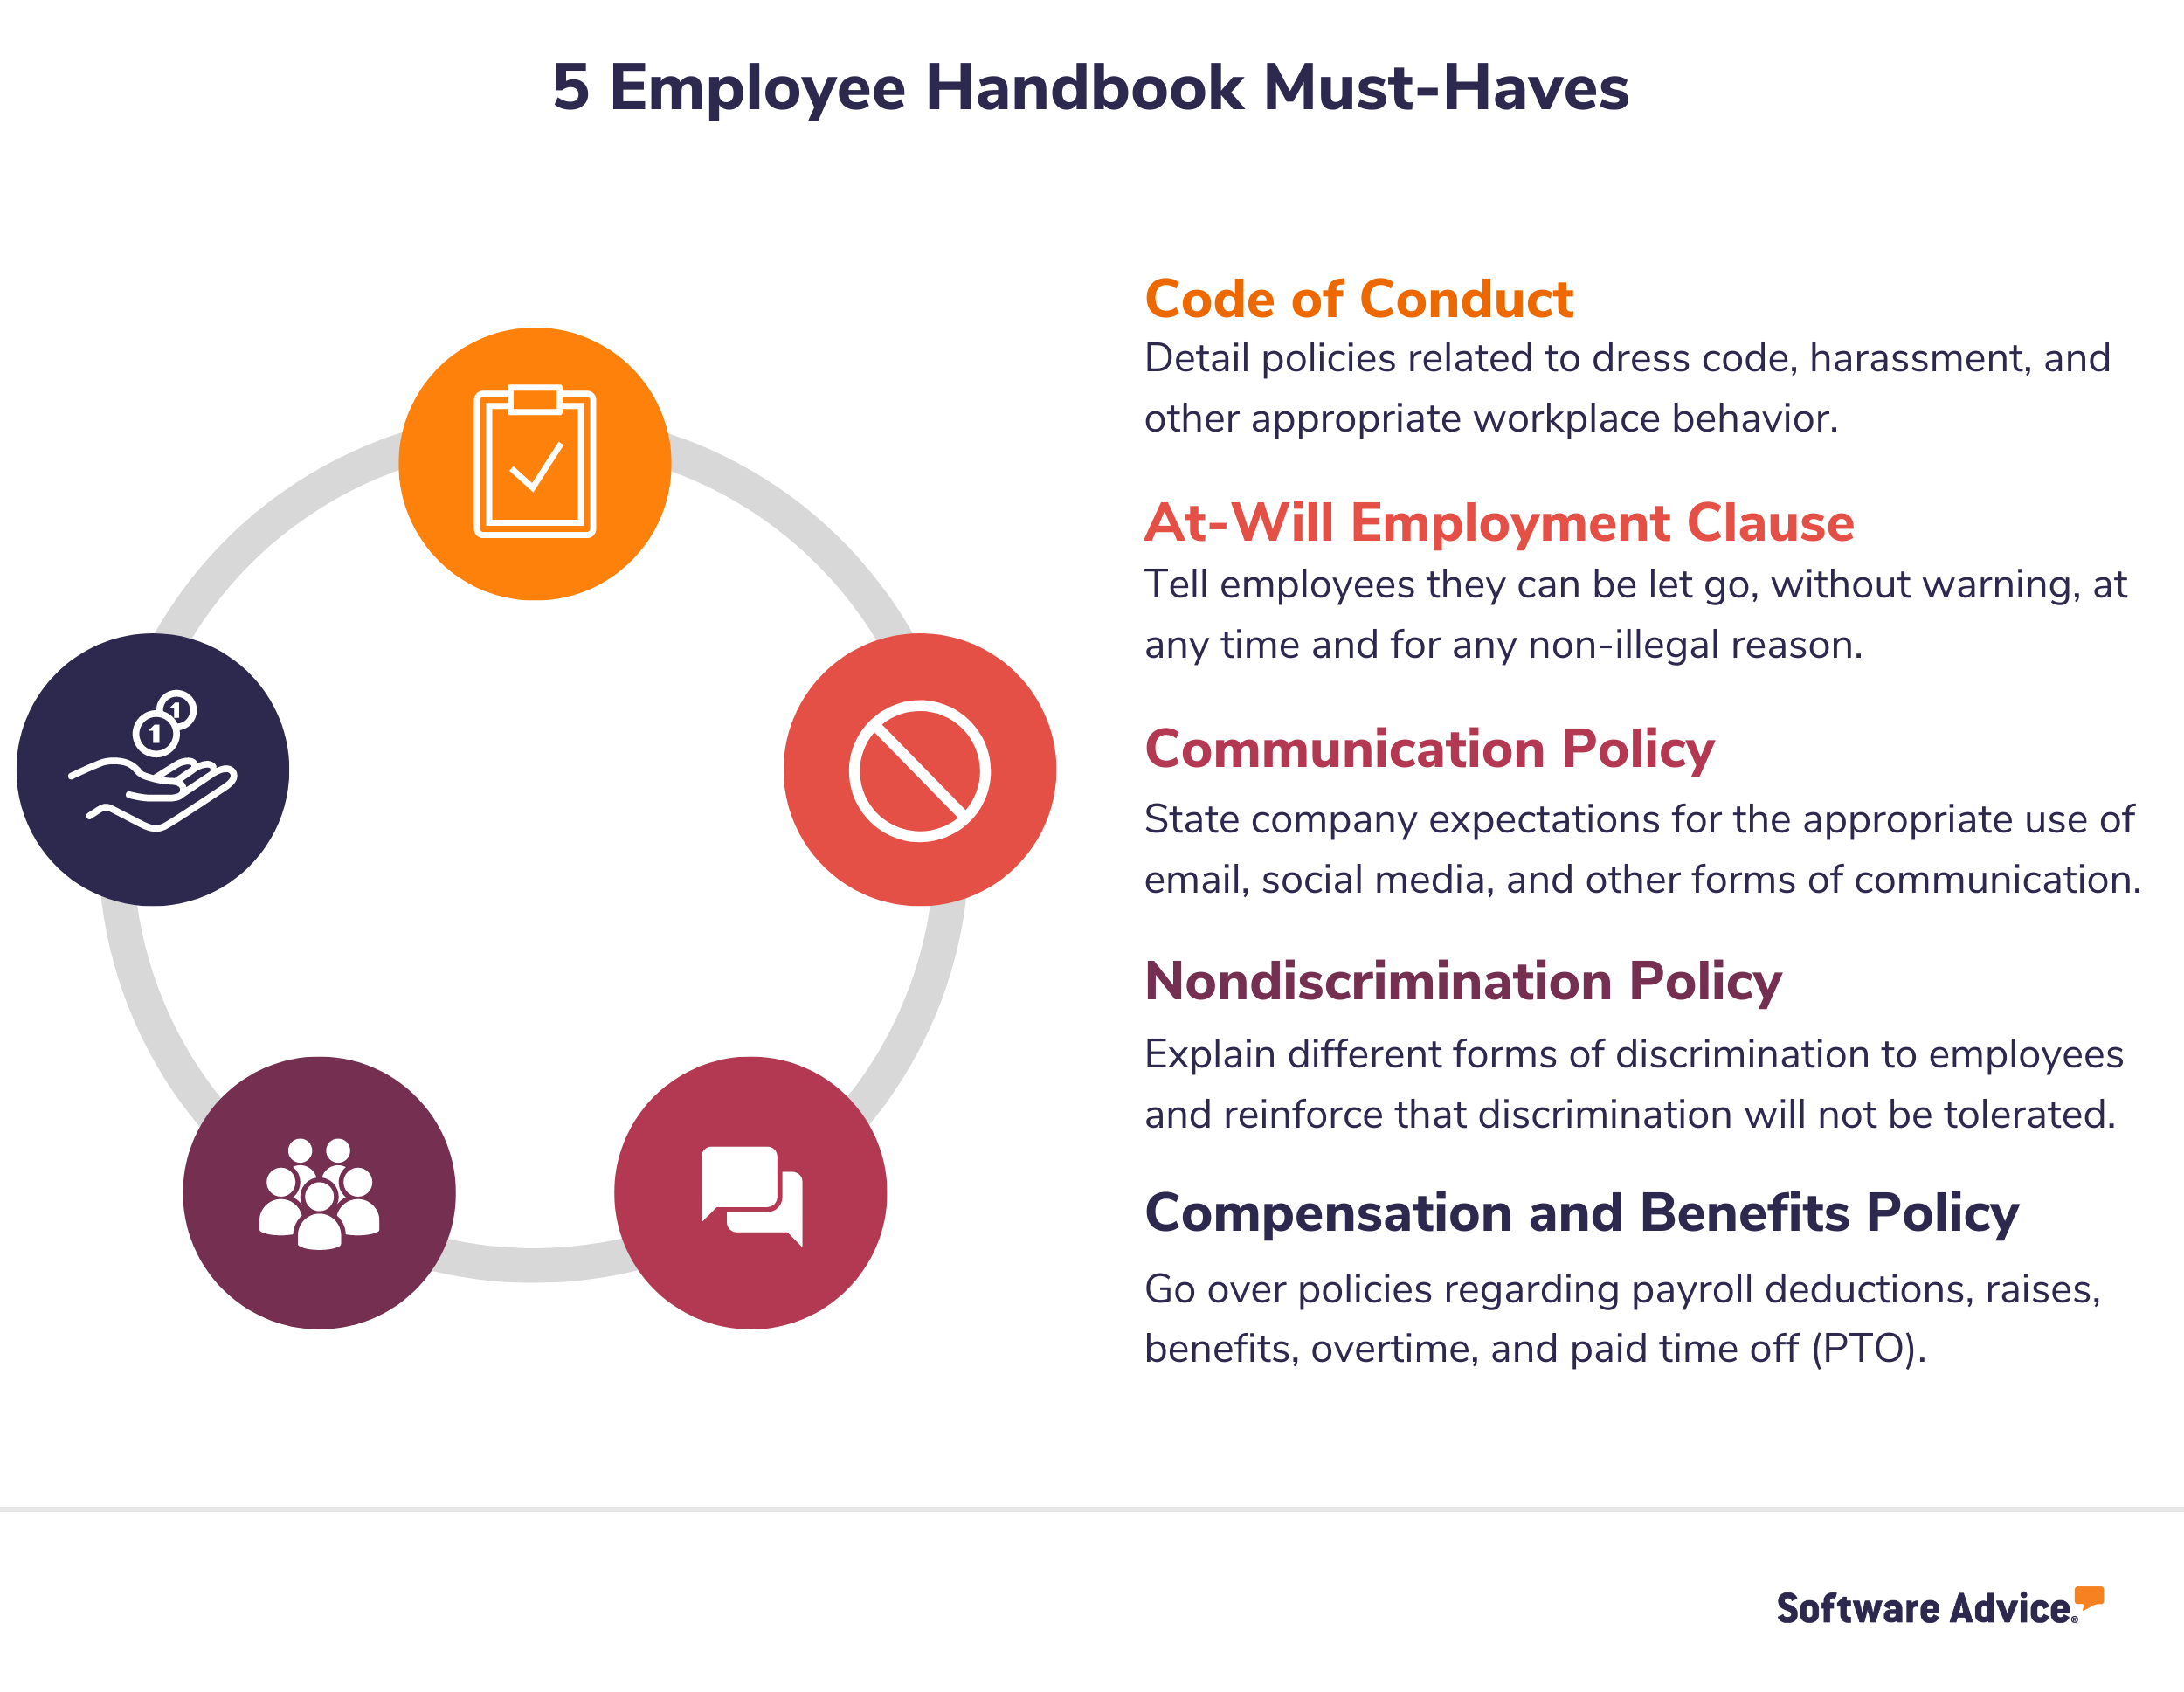 Chart-showing-five-must-haves-in-employee-handbooks:-A-code-of-conduct,-at-will-employment-clause,-communication-policy,-nondiscrimination-policy,-and-a-compensation-and-benefits-policy.